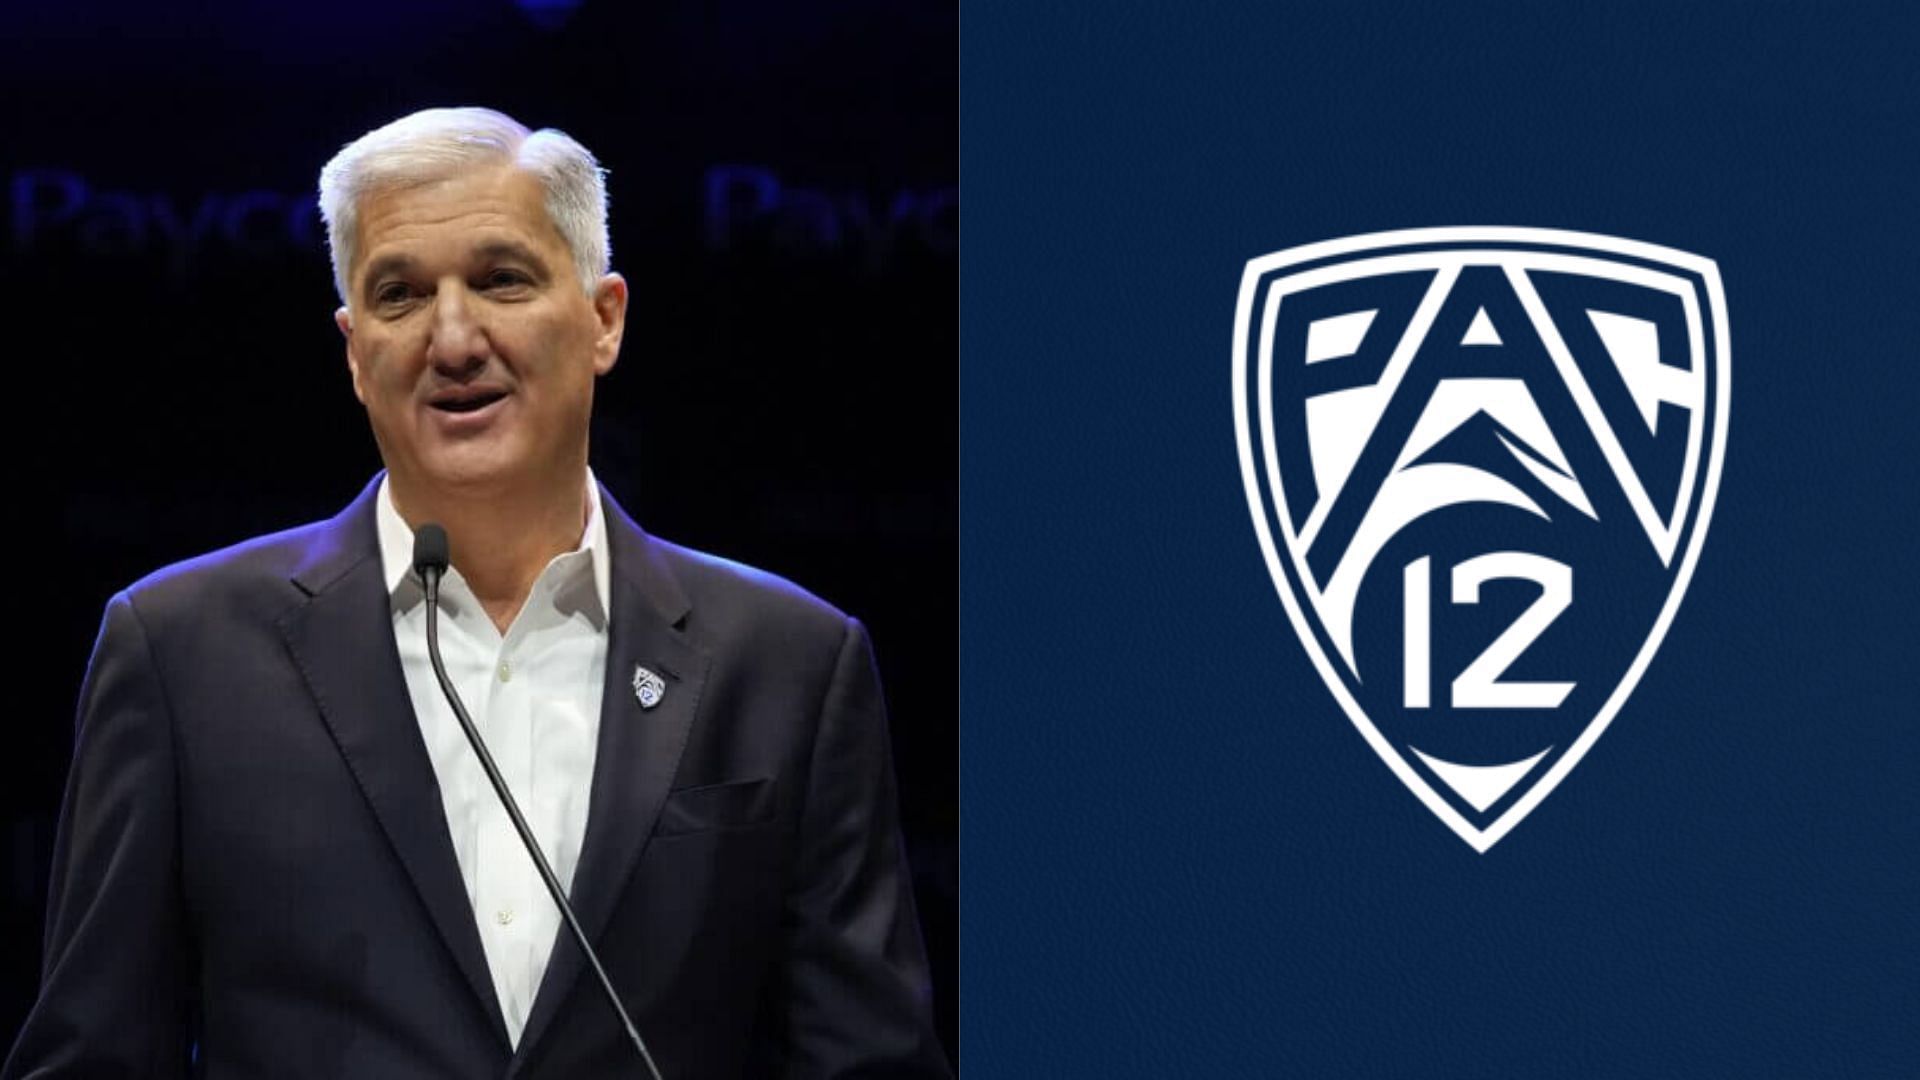 The Pac-12 collapse will be interesting to dissect as multiple parties are to blame.